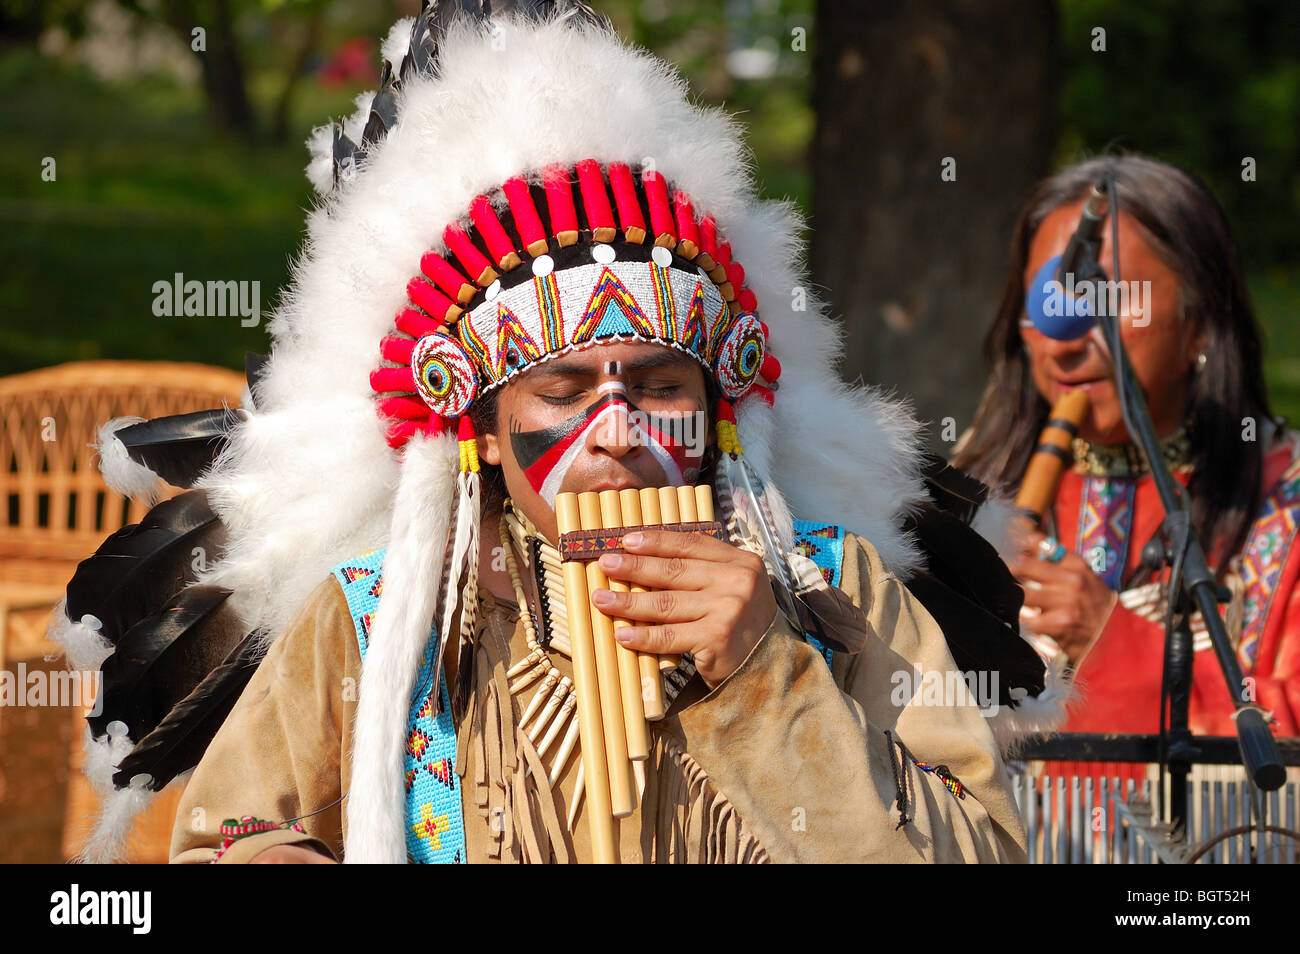 American Indians performing folk music Stock Photo